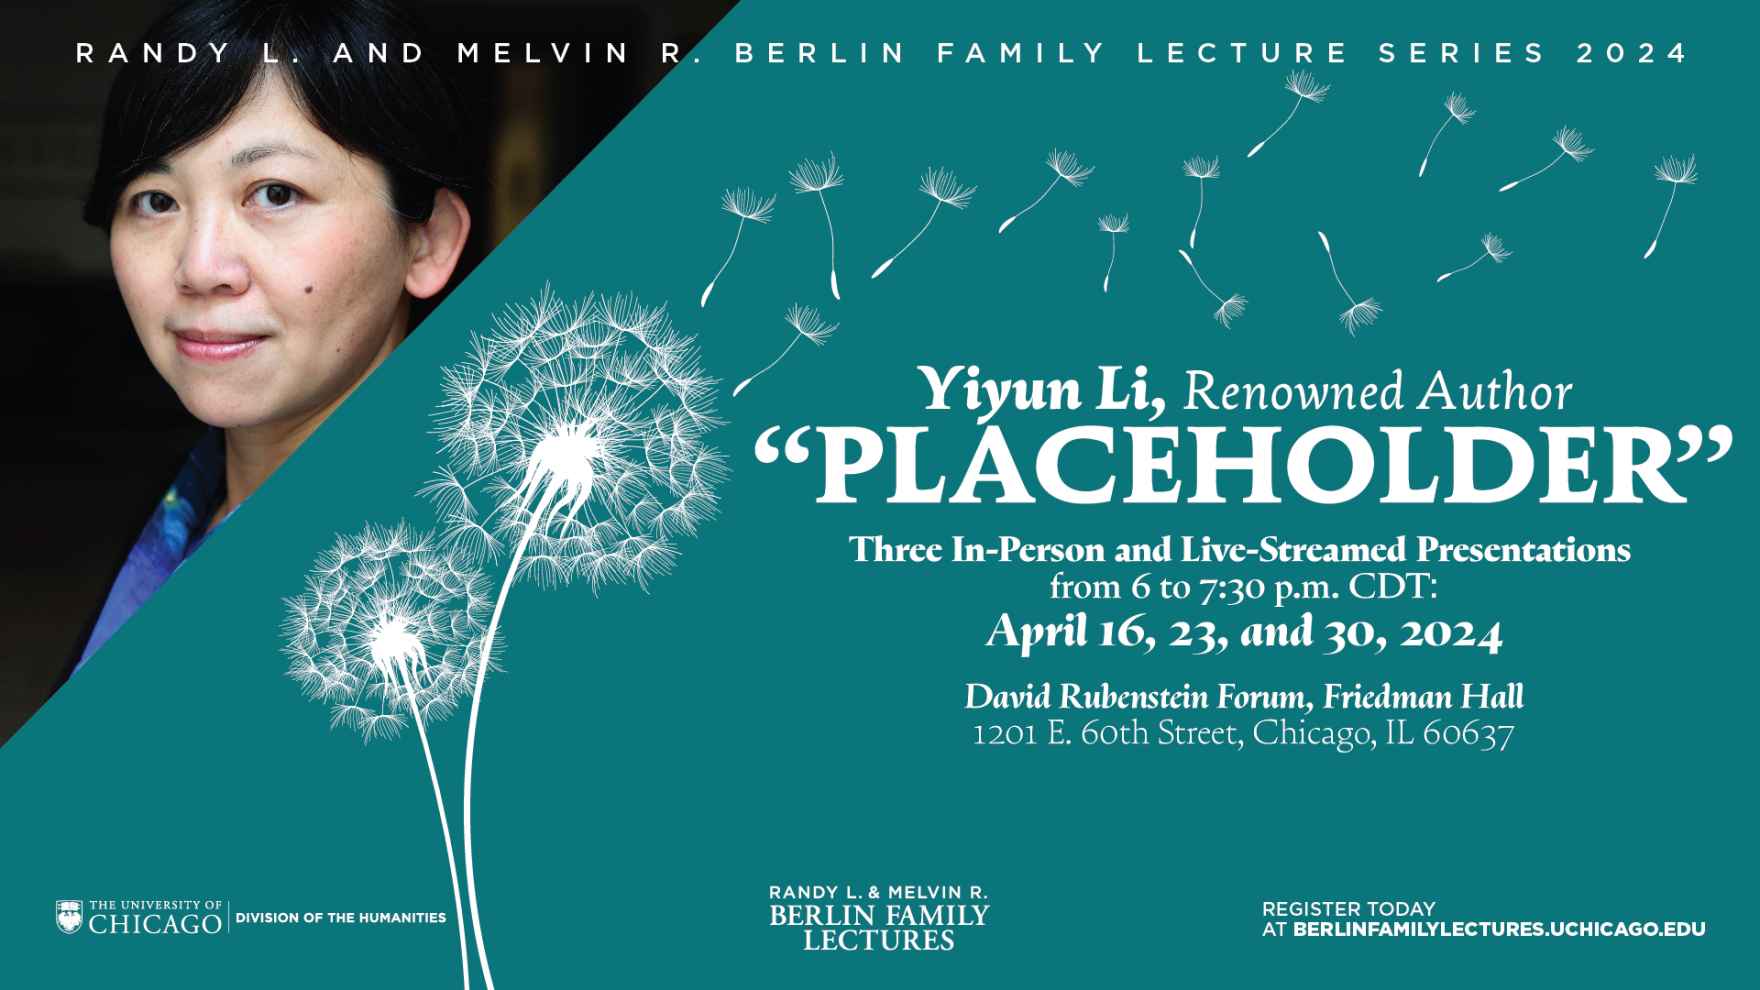 Yiyun Li is the Berlin Family Lecturer for 2024.